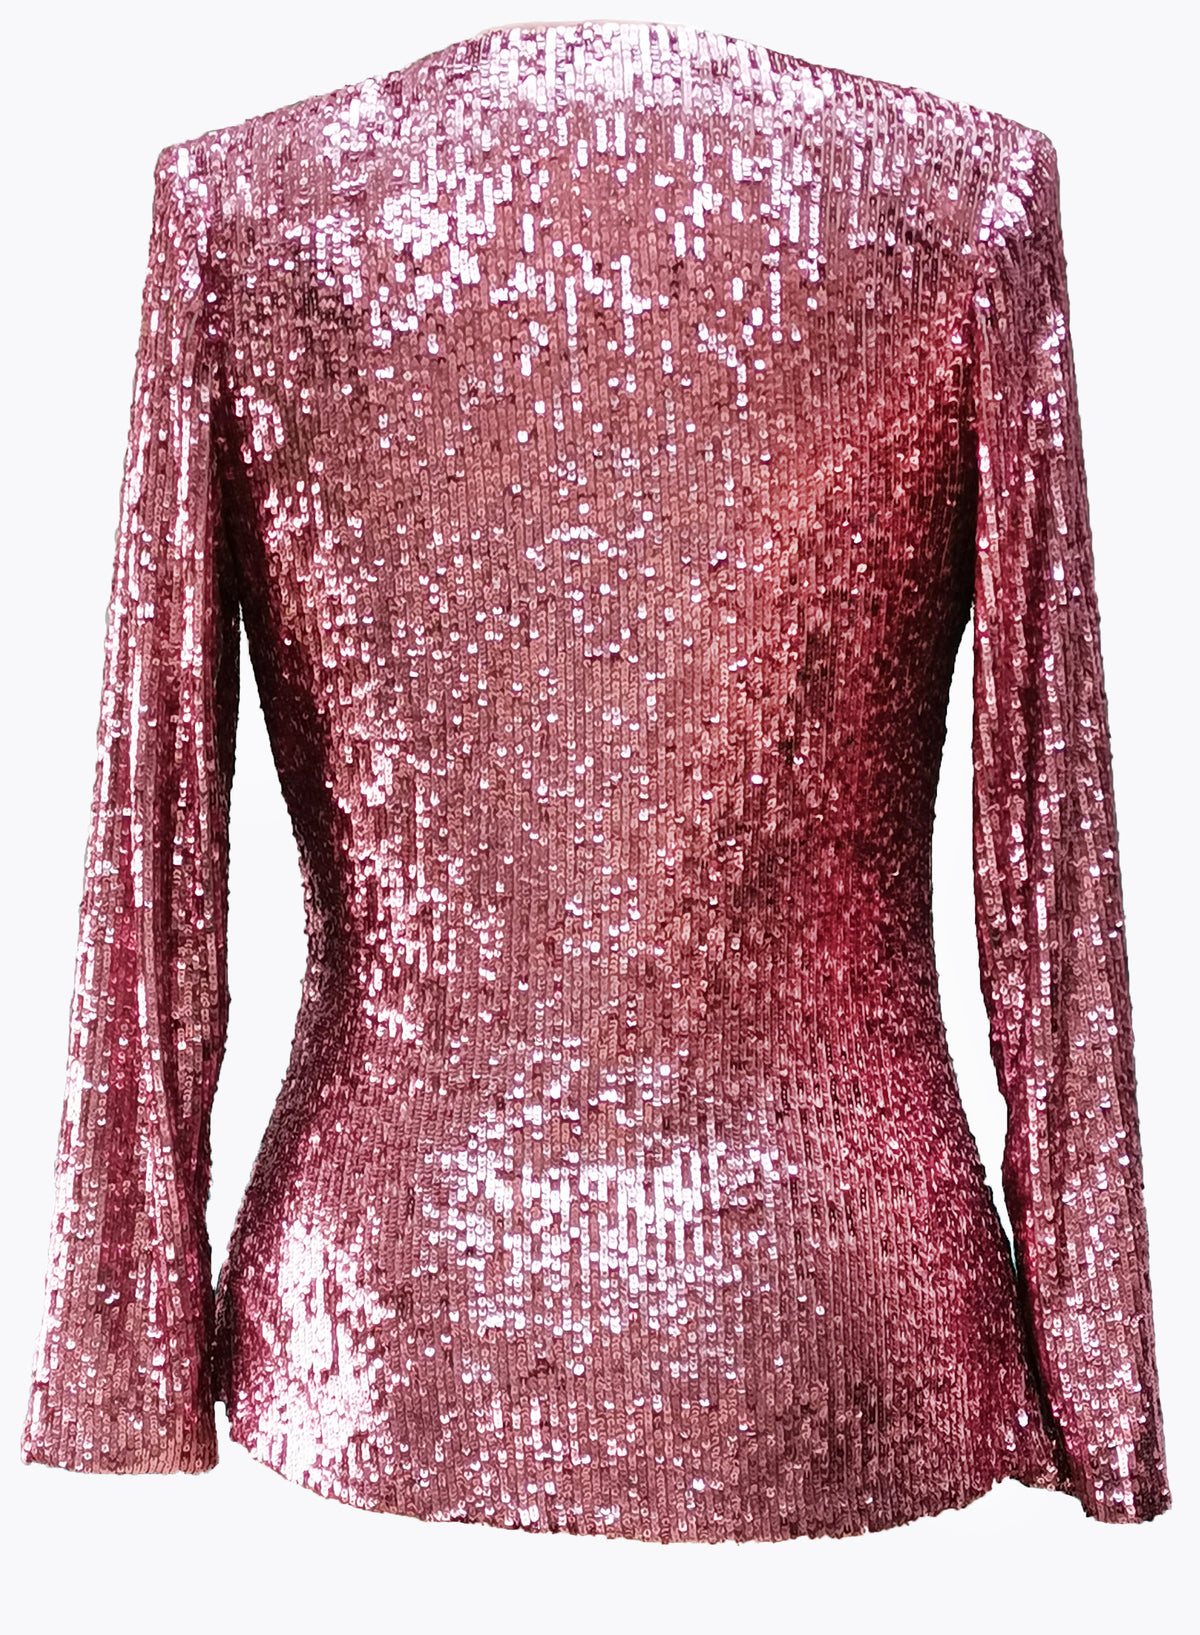 Stella Top TOP335 Dusty Rose Pink Sequins